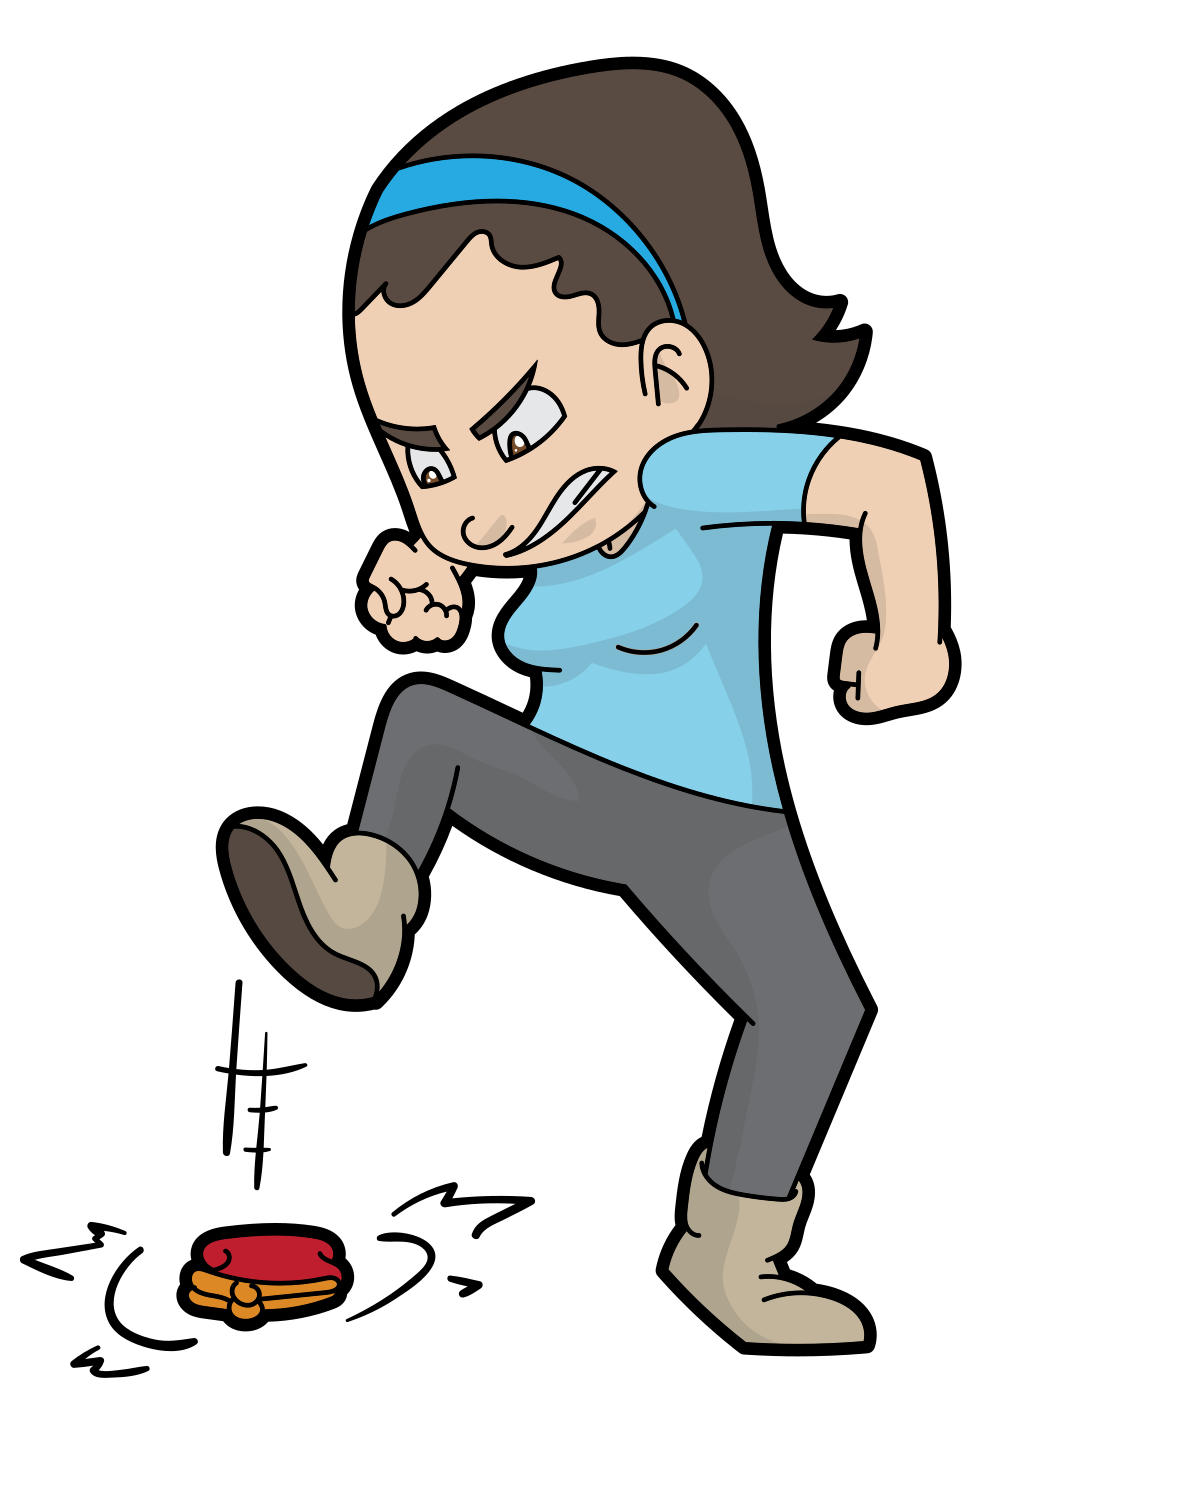 Download File:Angry Cartoon Woman Stomping On Her Coin Purse.svg - Wikimedia Commons